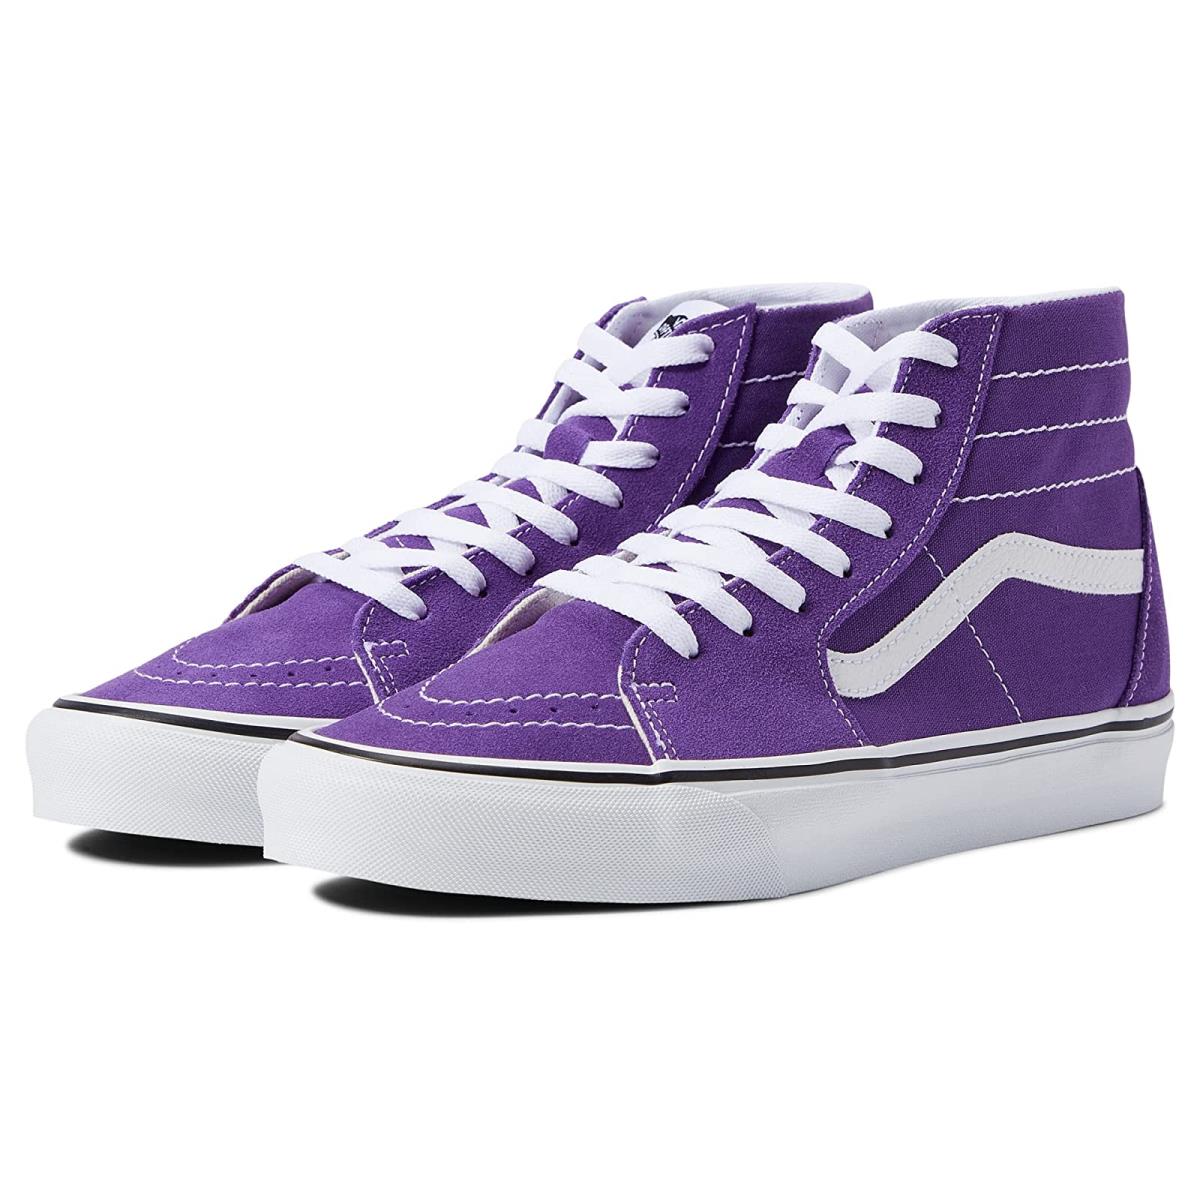 Unisex Sneakers Athletic Shoes Vans Sk8-Hi Tapered Color Theory Tillandsia Purple